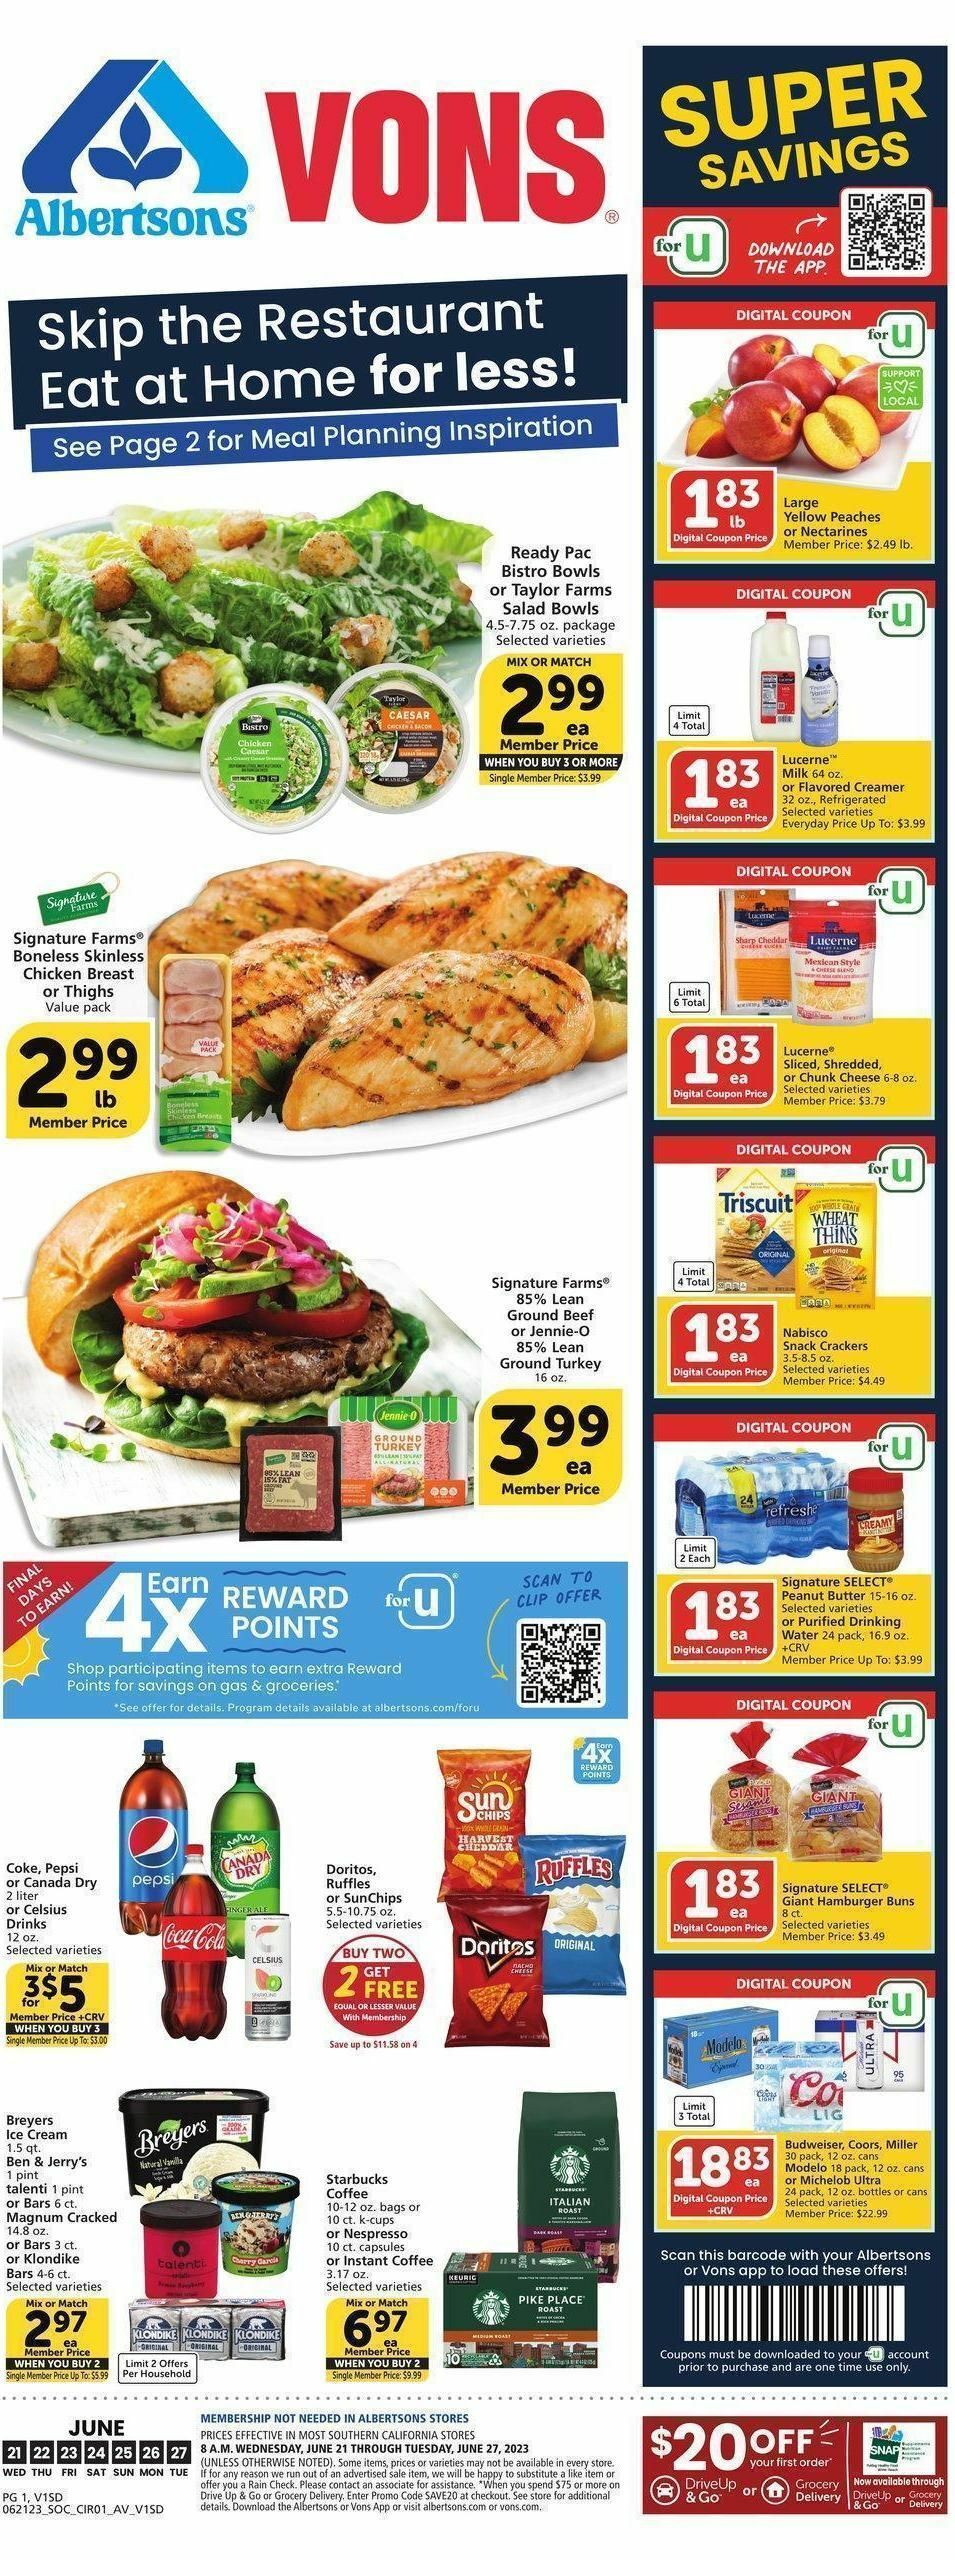 Vons Weekly Ad from June 21